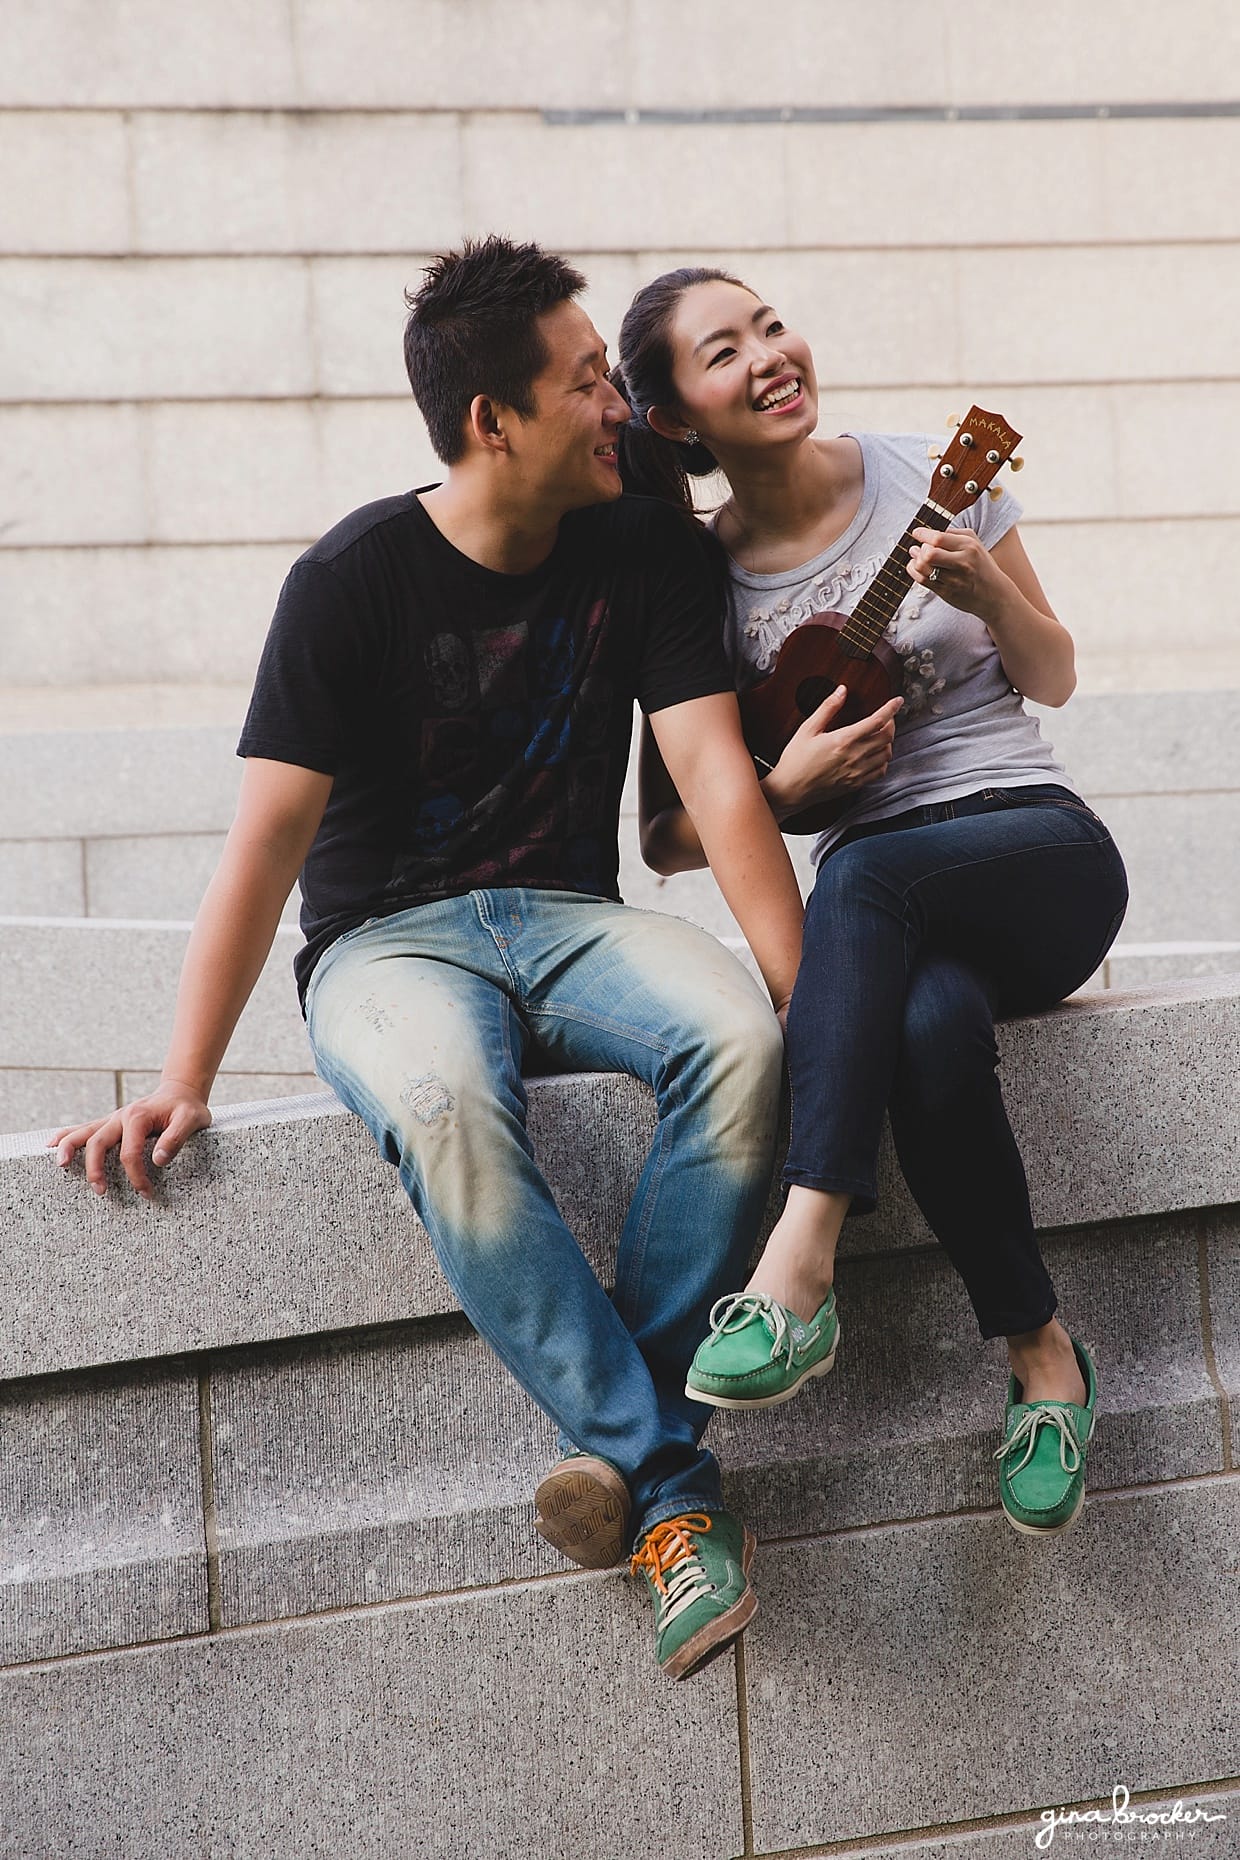 A couple play an ukulele during their engagement at the Boston Museum of Fine Art in Massachusetts